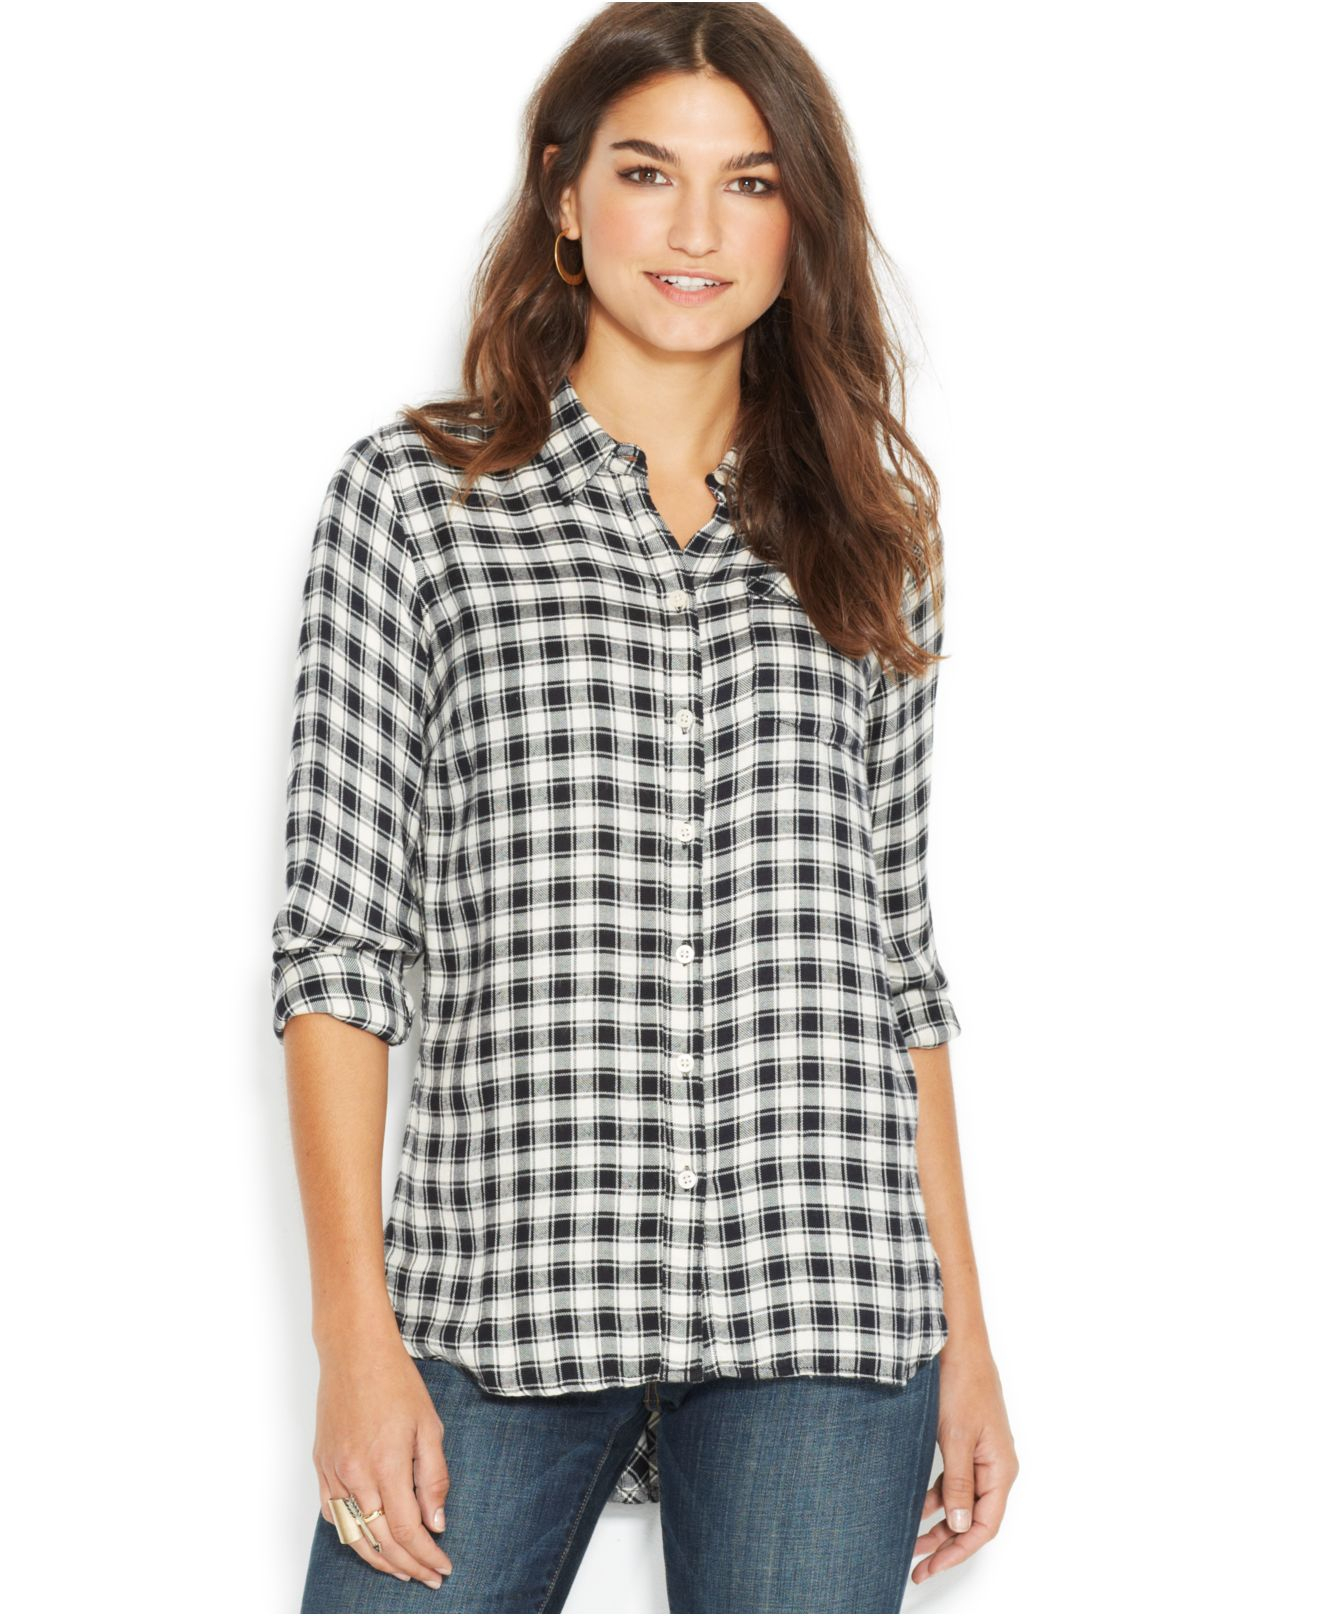 Lyst - Lucky Brand Lucky Brand Long-Sleeve Plaid Flannel Blouse in Blue